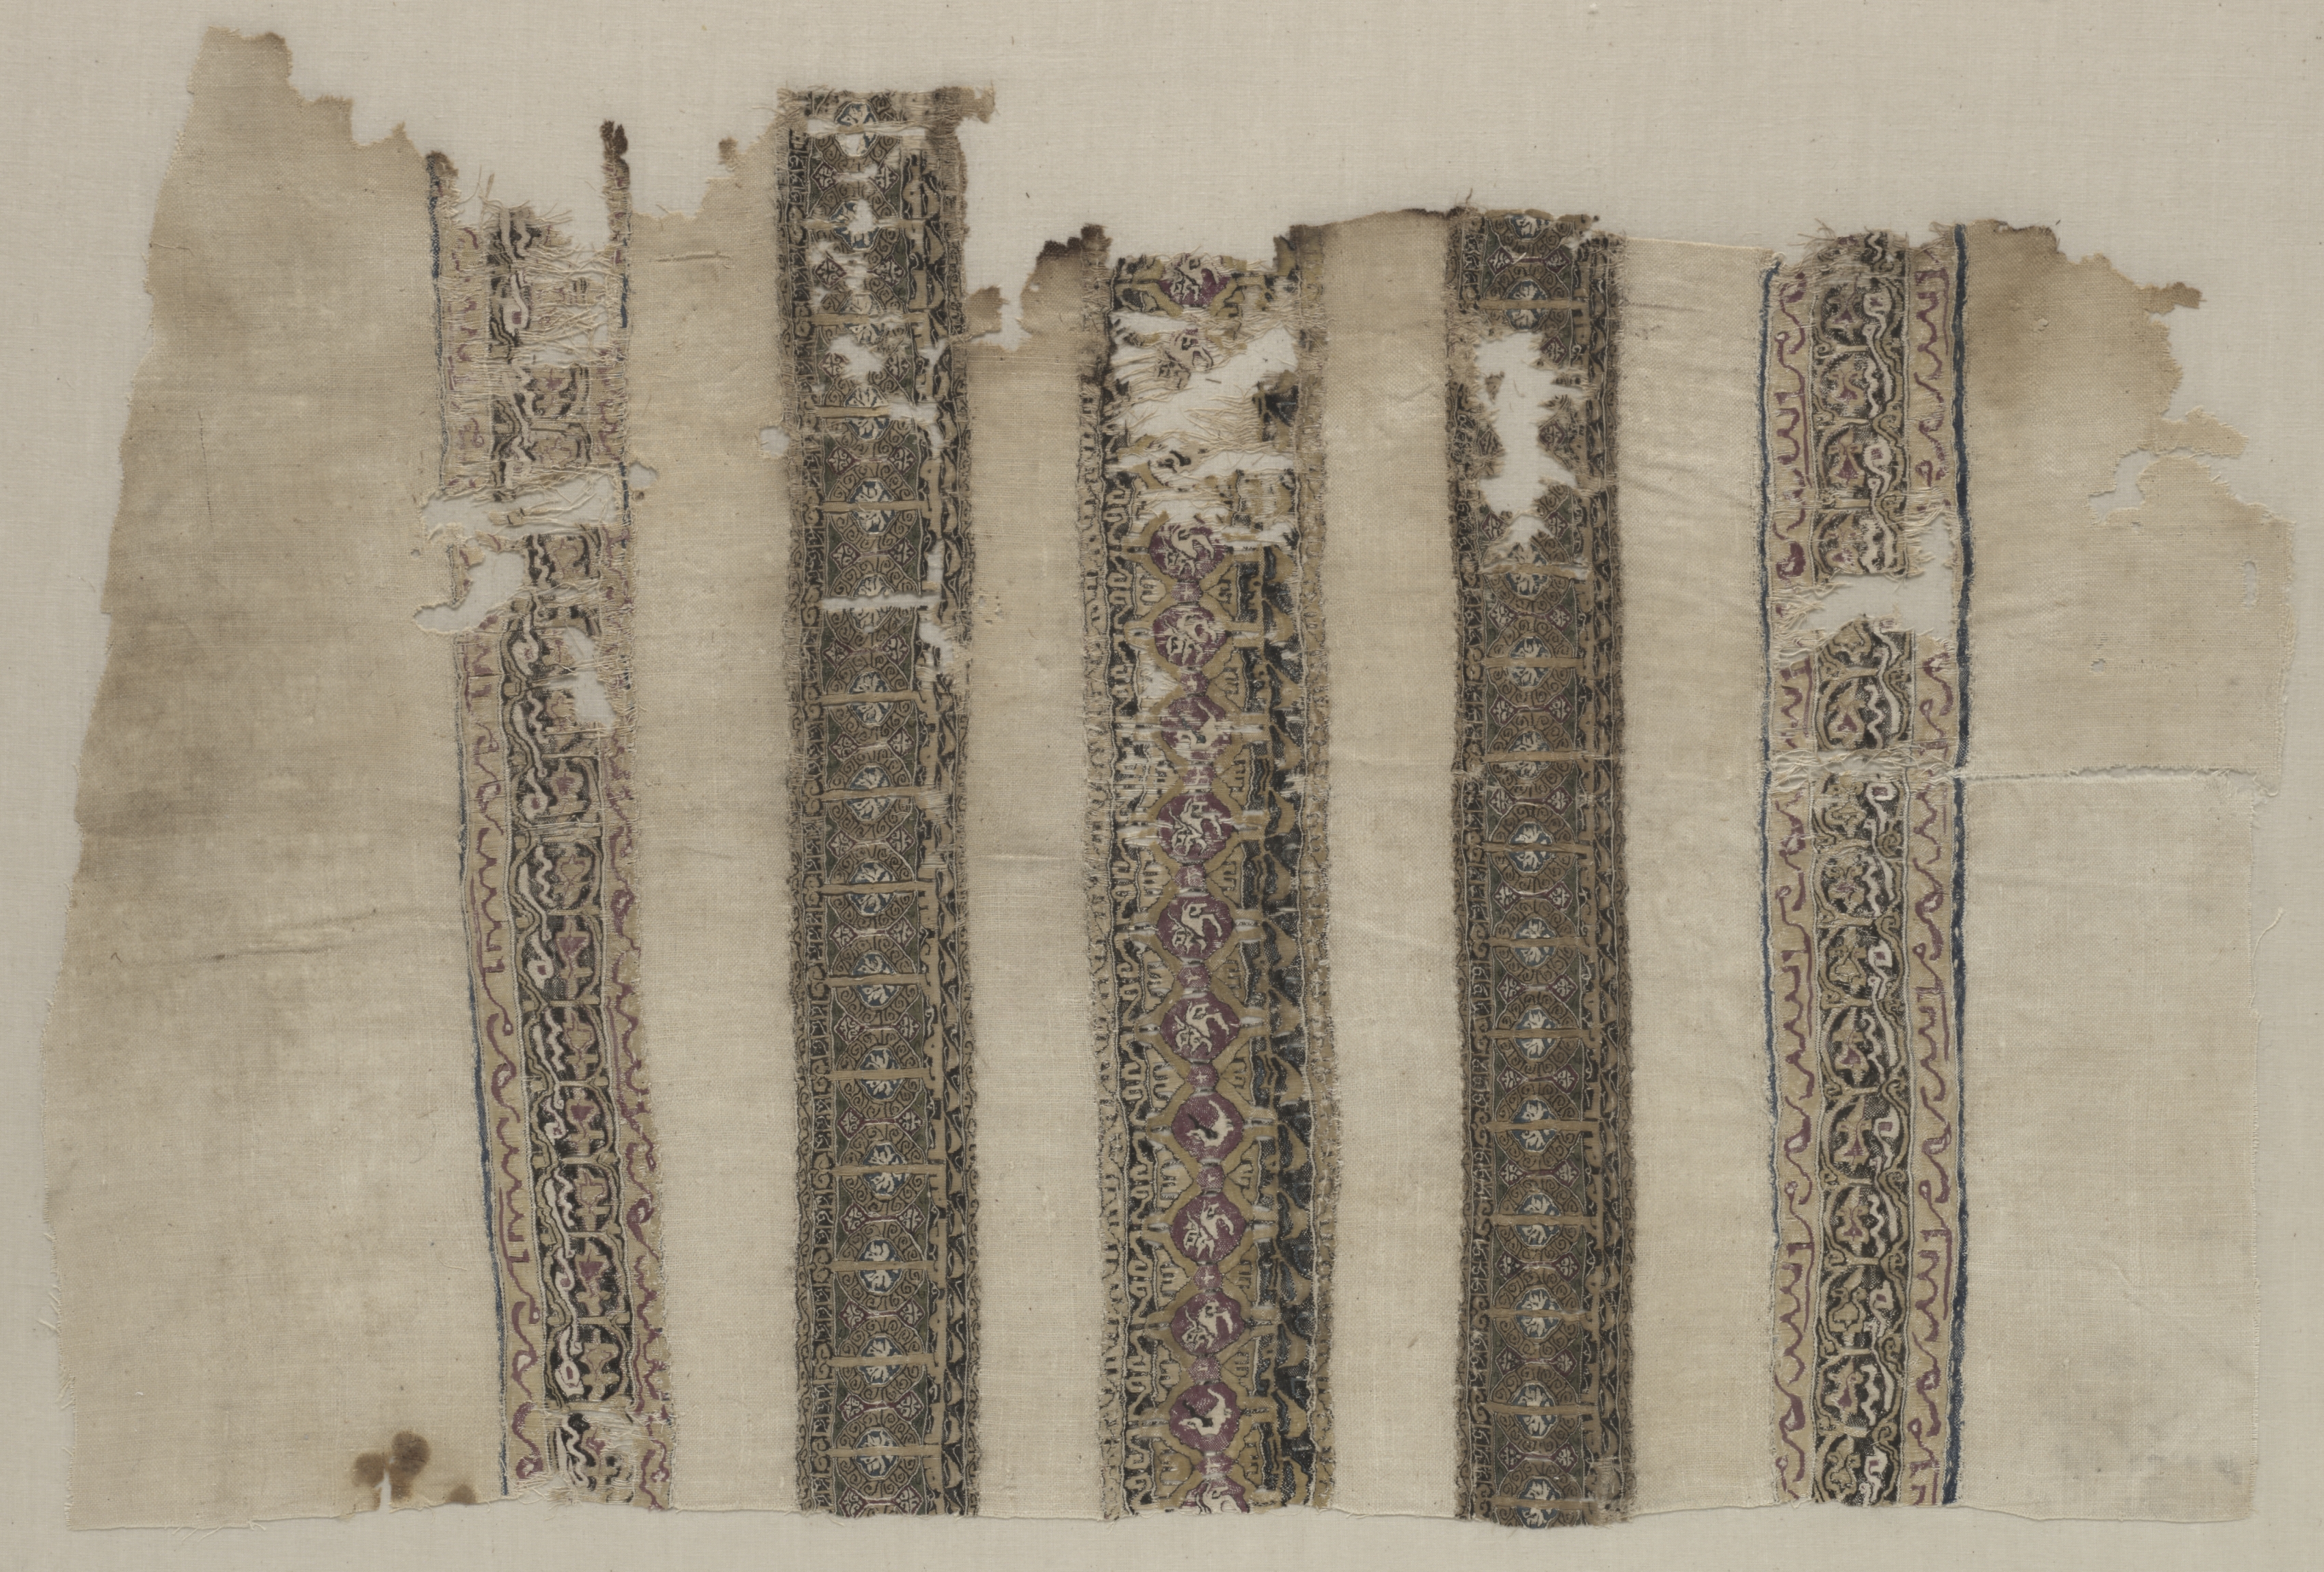 Fragment Composed of Parts of Three Tiraz-Style Textiles